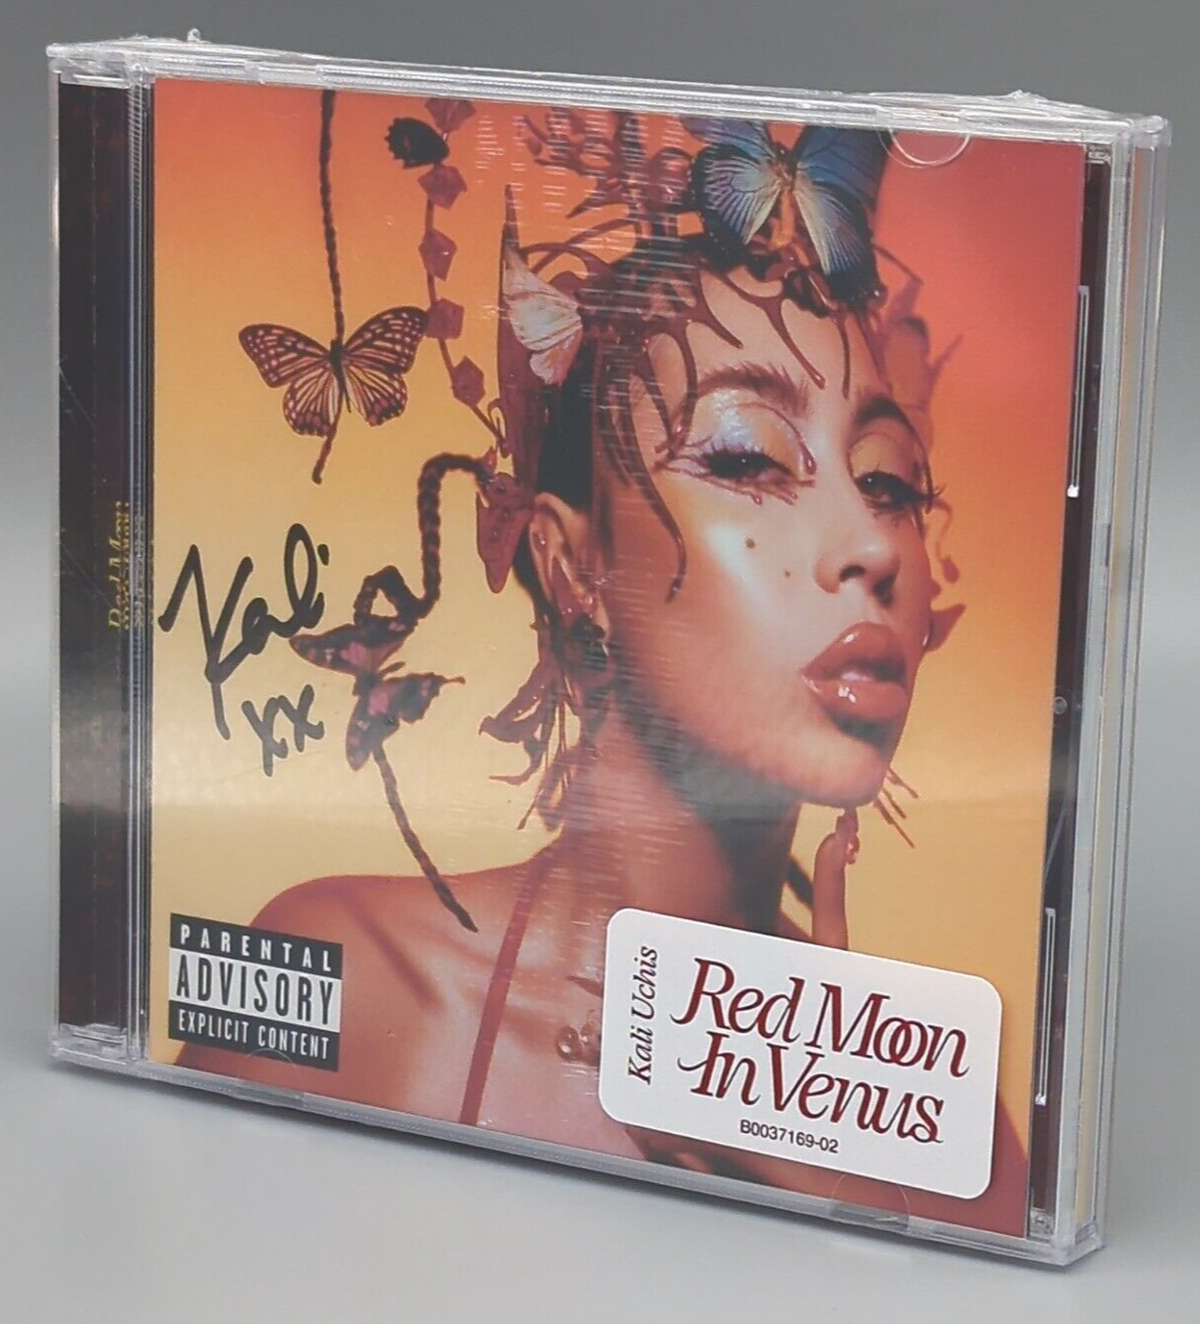 Kali Uchis - Red Moon In Venus CD (Autographed)